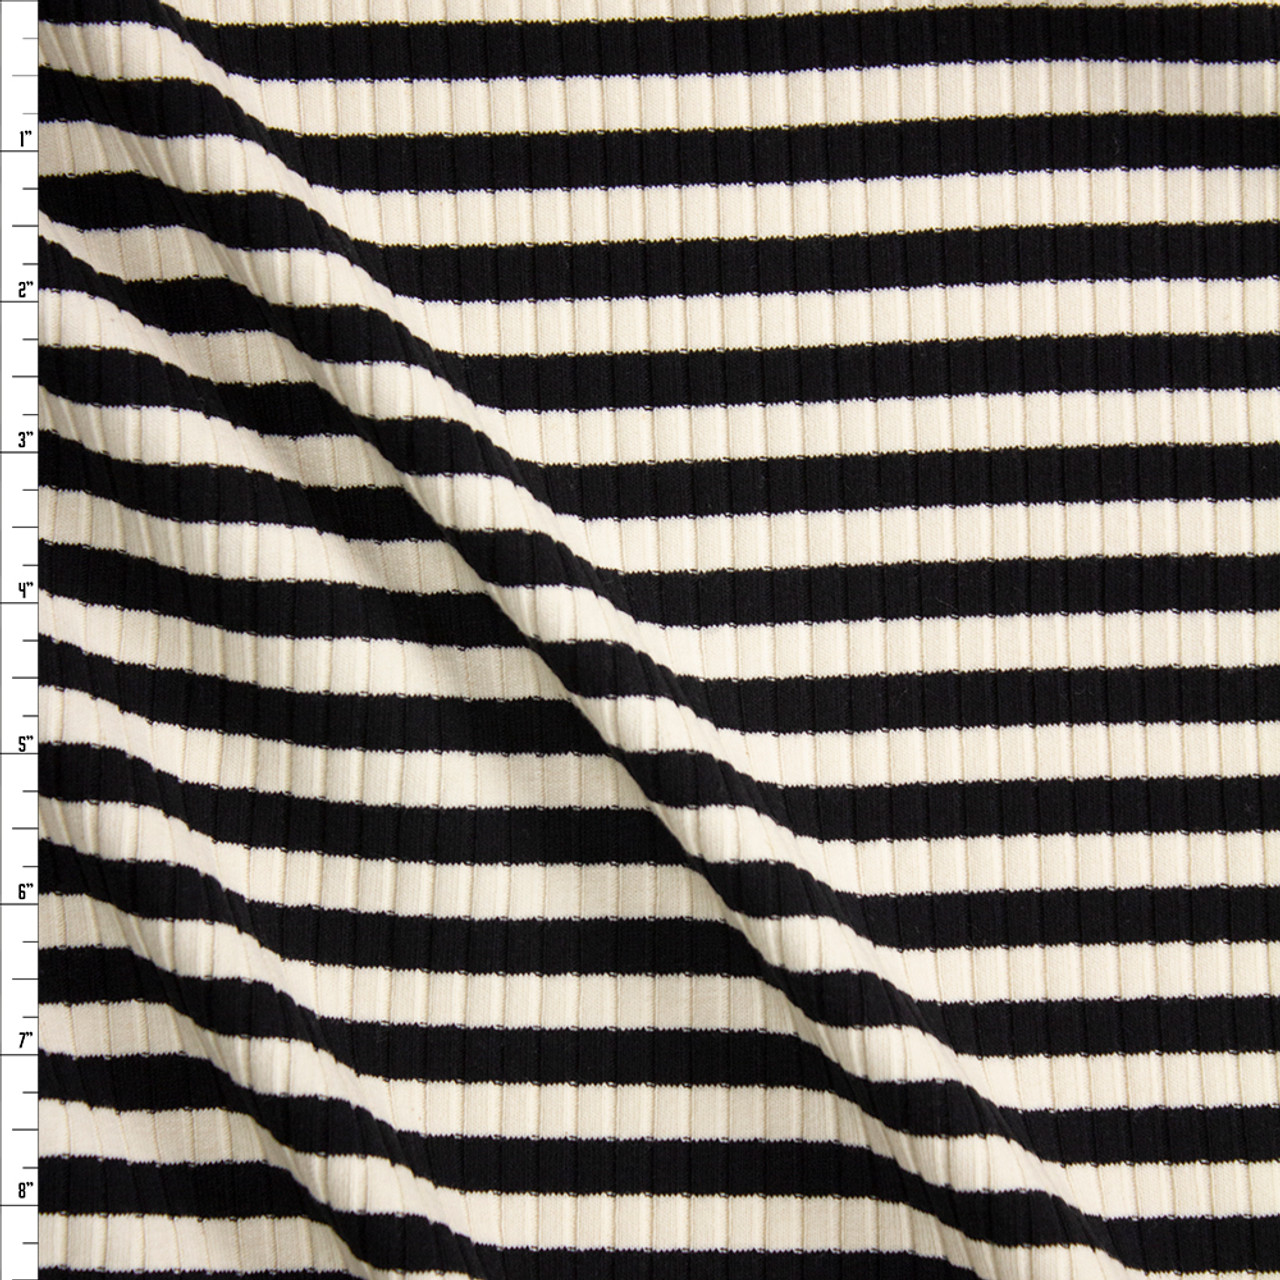 46 Modal Striped Polka Dot White Red Black Rib Knit & Double Knit Fabric  By the Yard